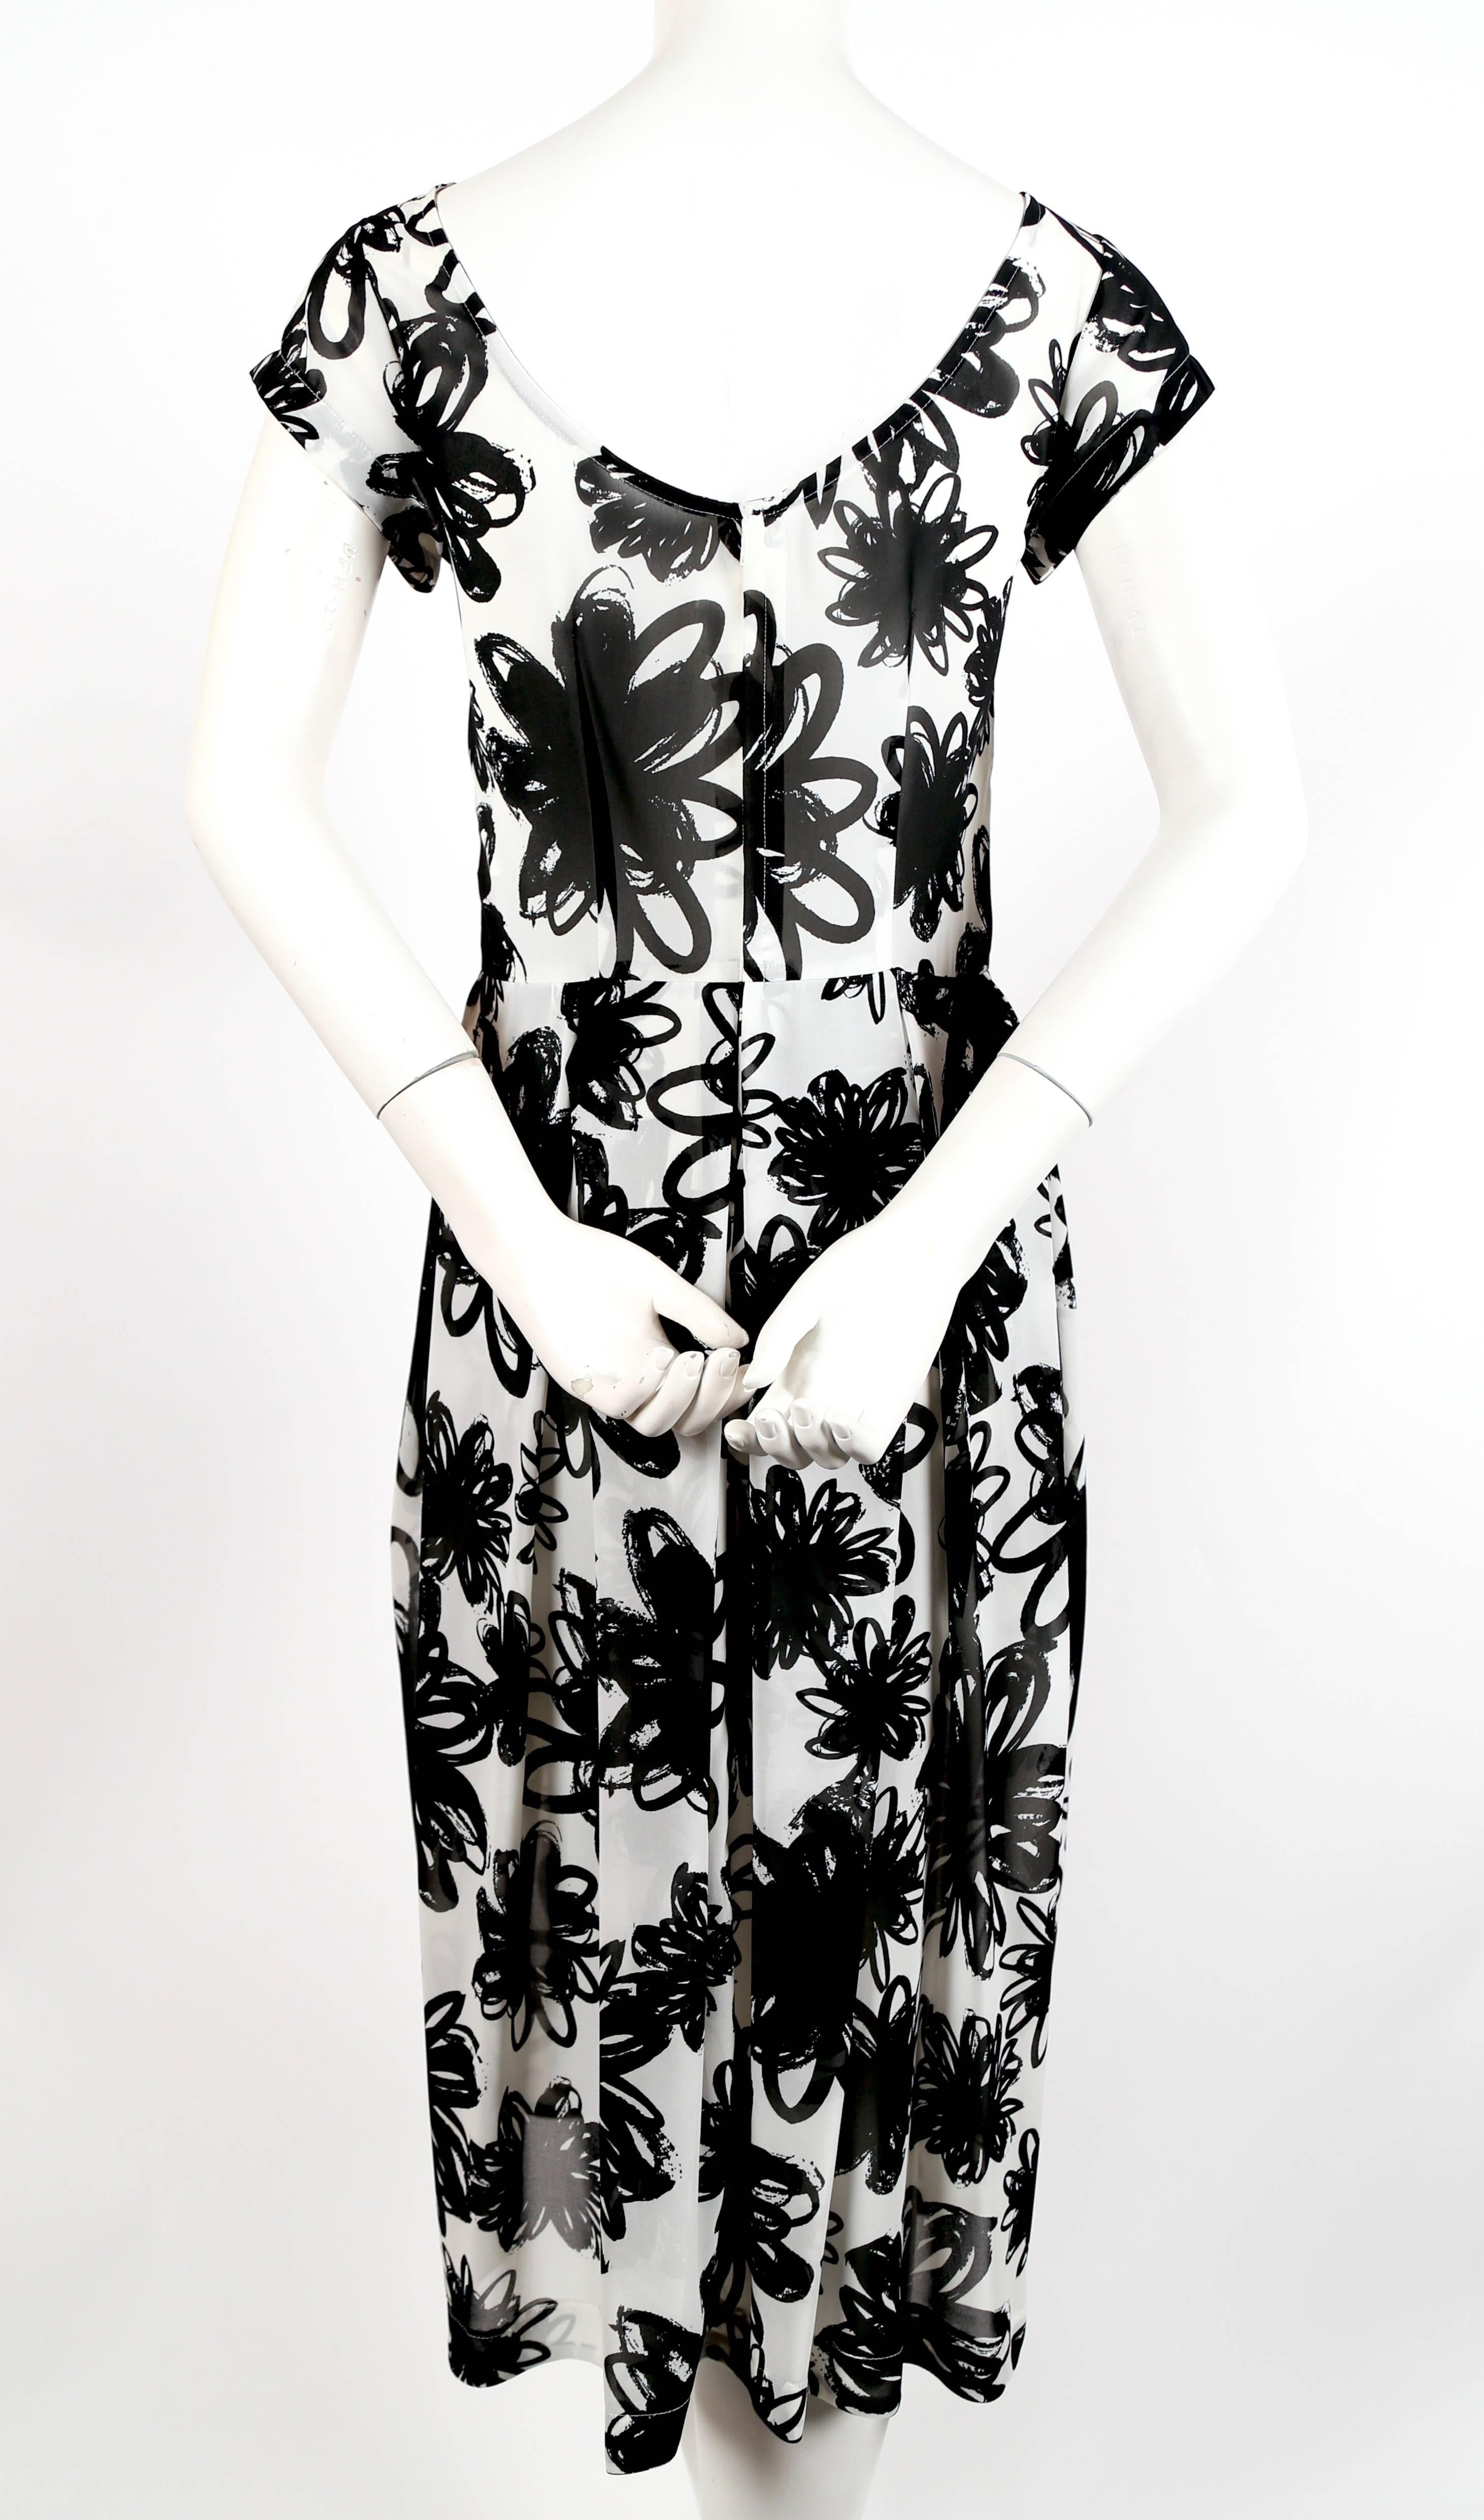 Black COMME DES GARCONS black and white abstract floral printed dress